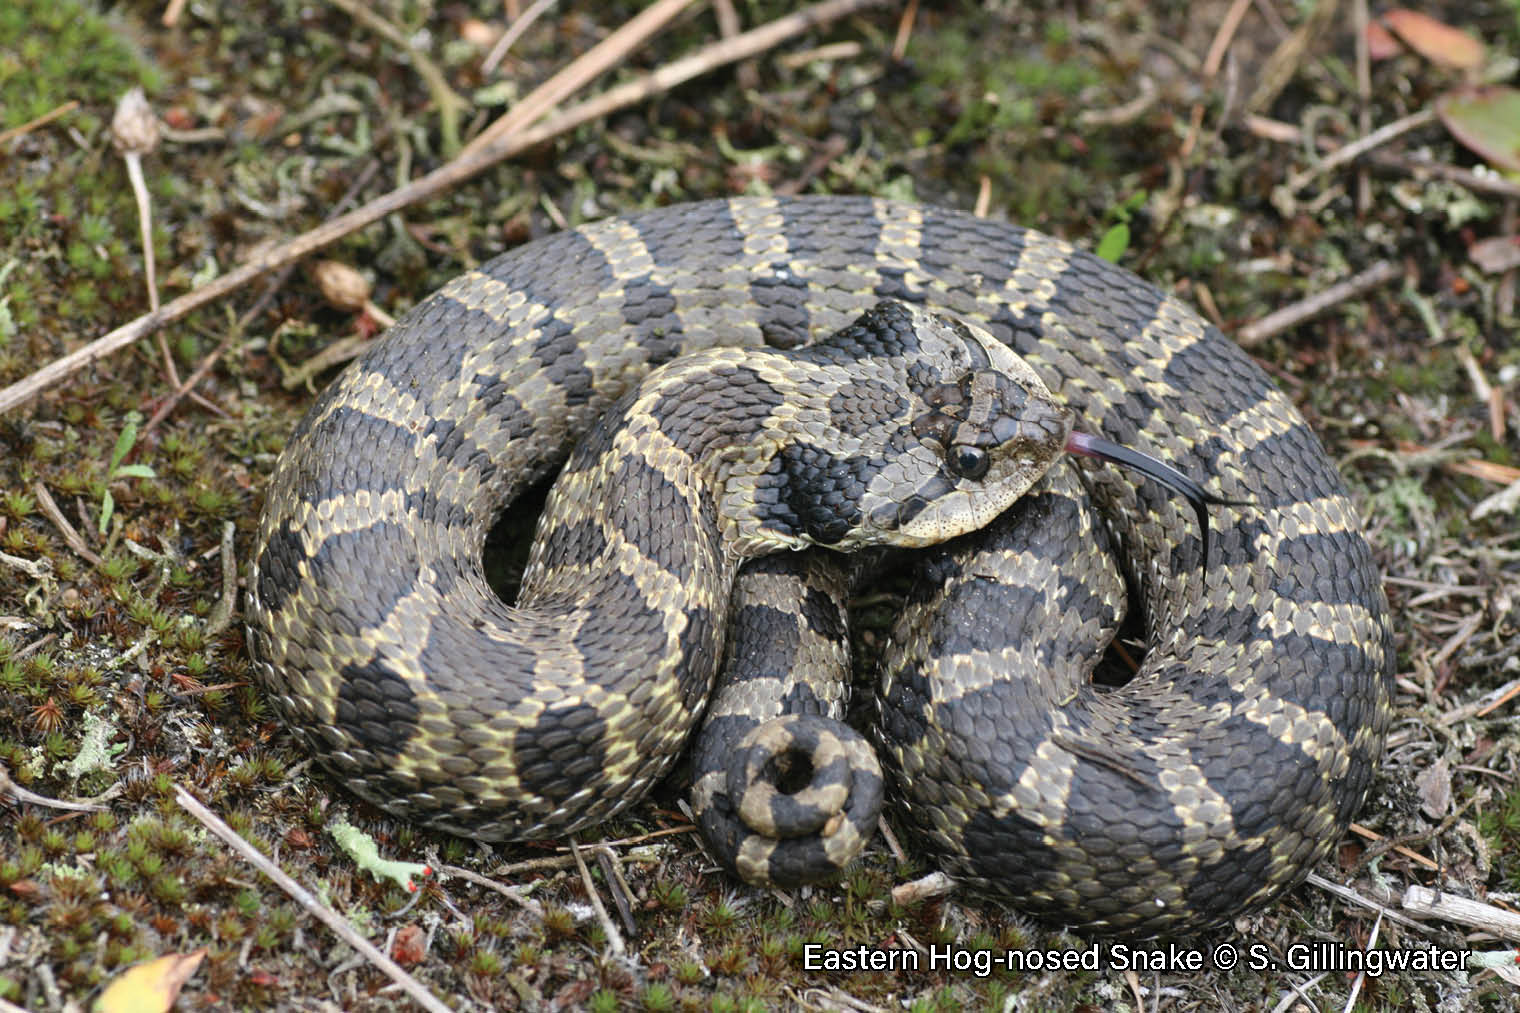 Picture of an Eastern Hog-nosed snake, a thick-bodied yellowish-brown snake with dark brown blotches and an upturned snout. Snake is coiled and has its neck flared in a defensive display.